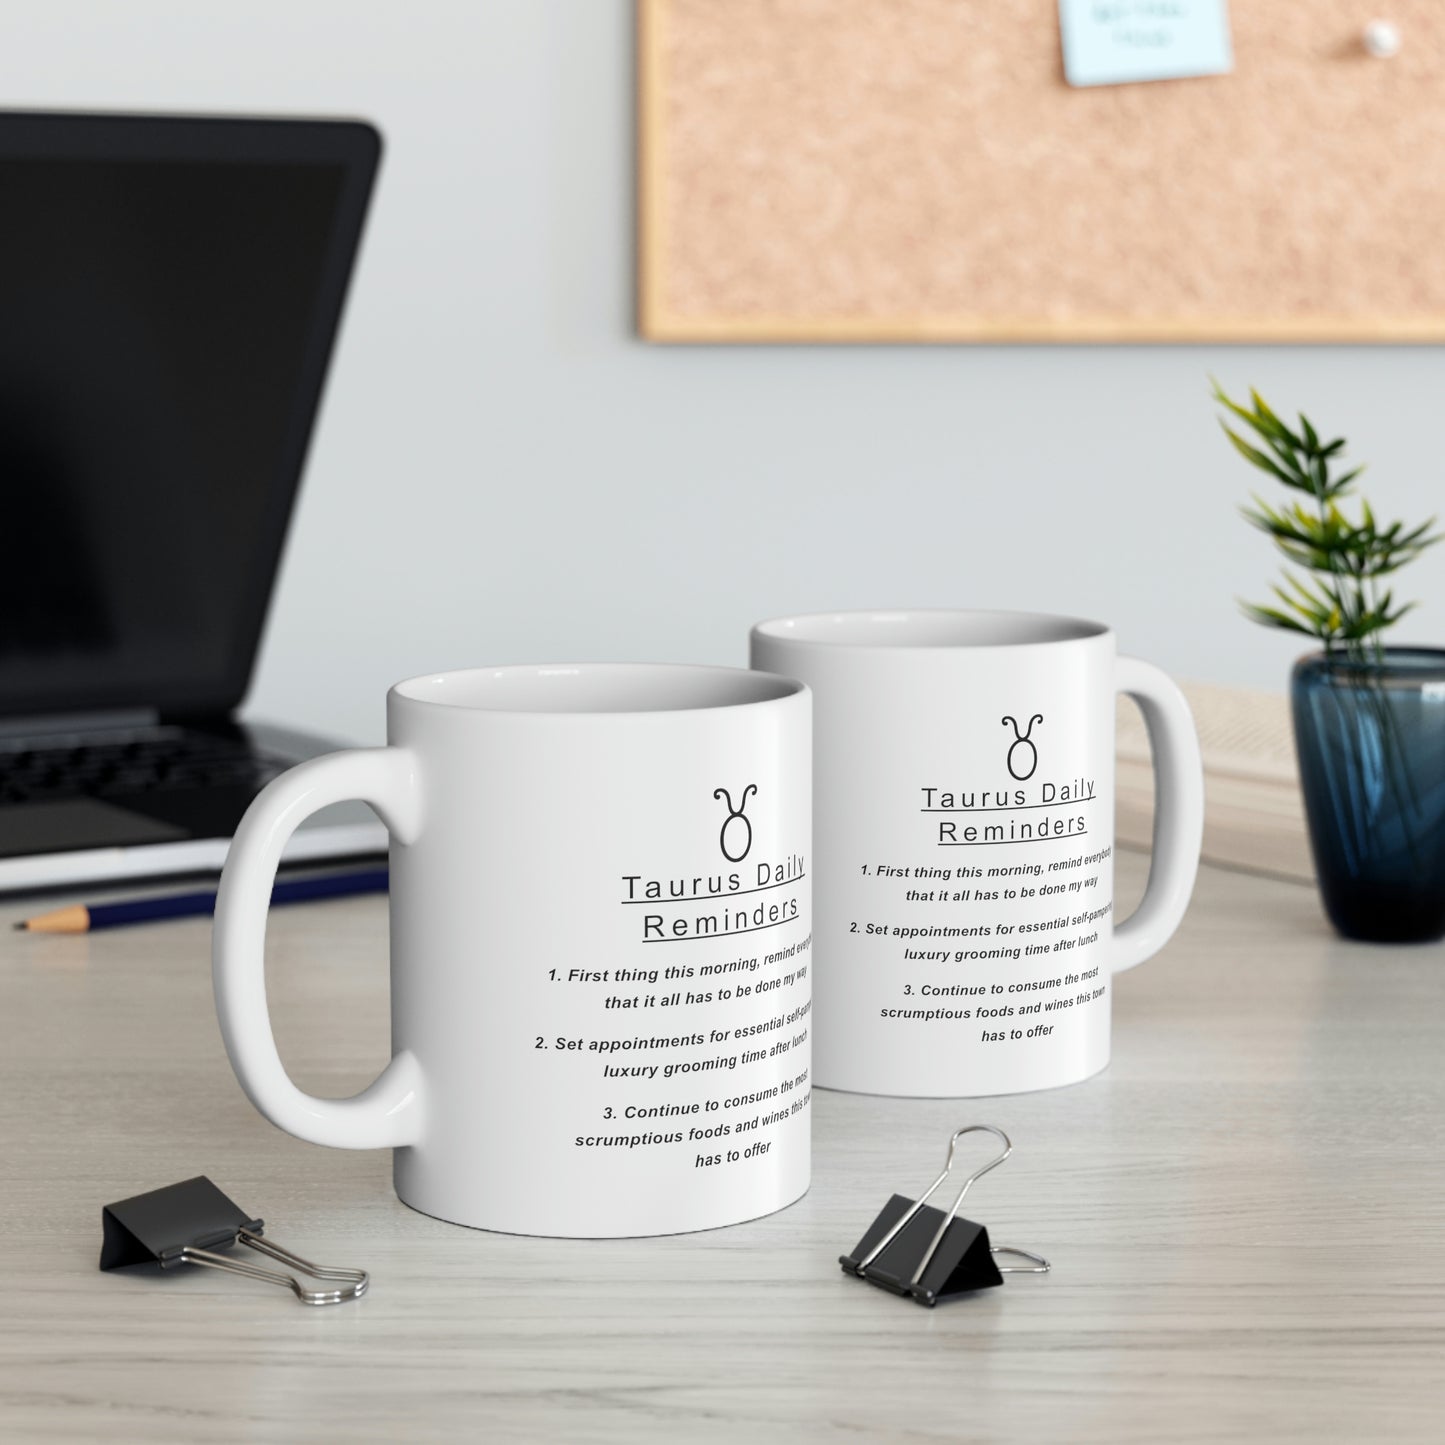 Taurus mug: "A Taurus Daily Reminders" - full text in the description